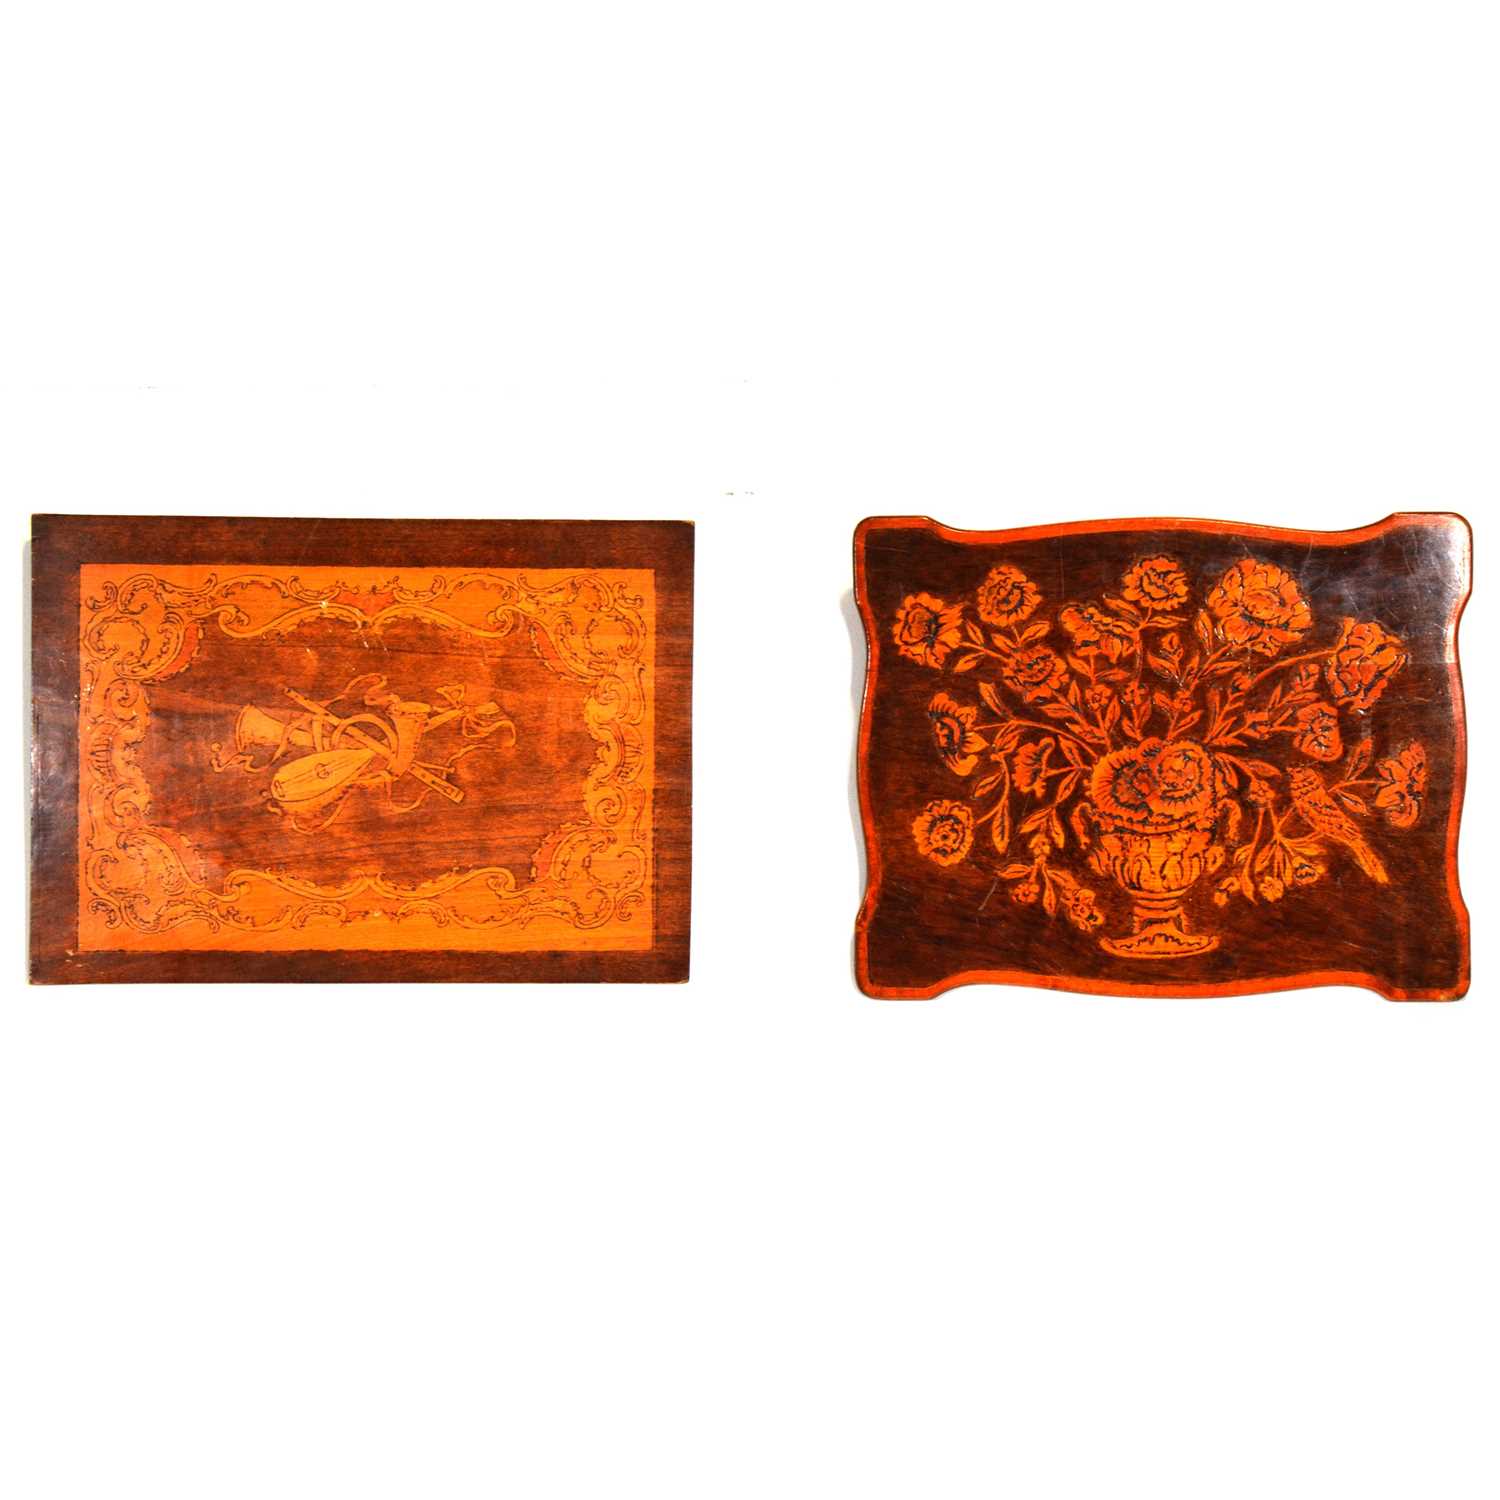 Marquetry panel, and a pokerwork panel,